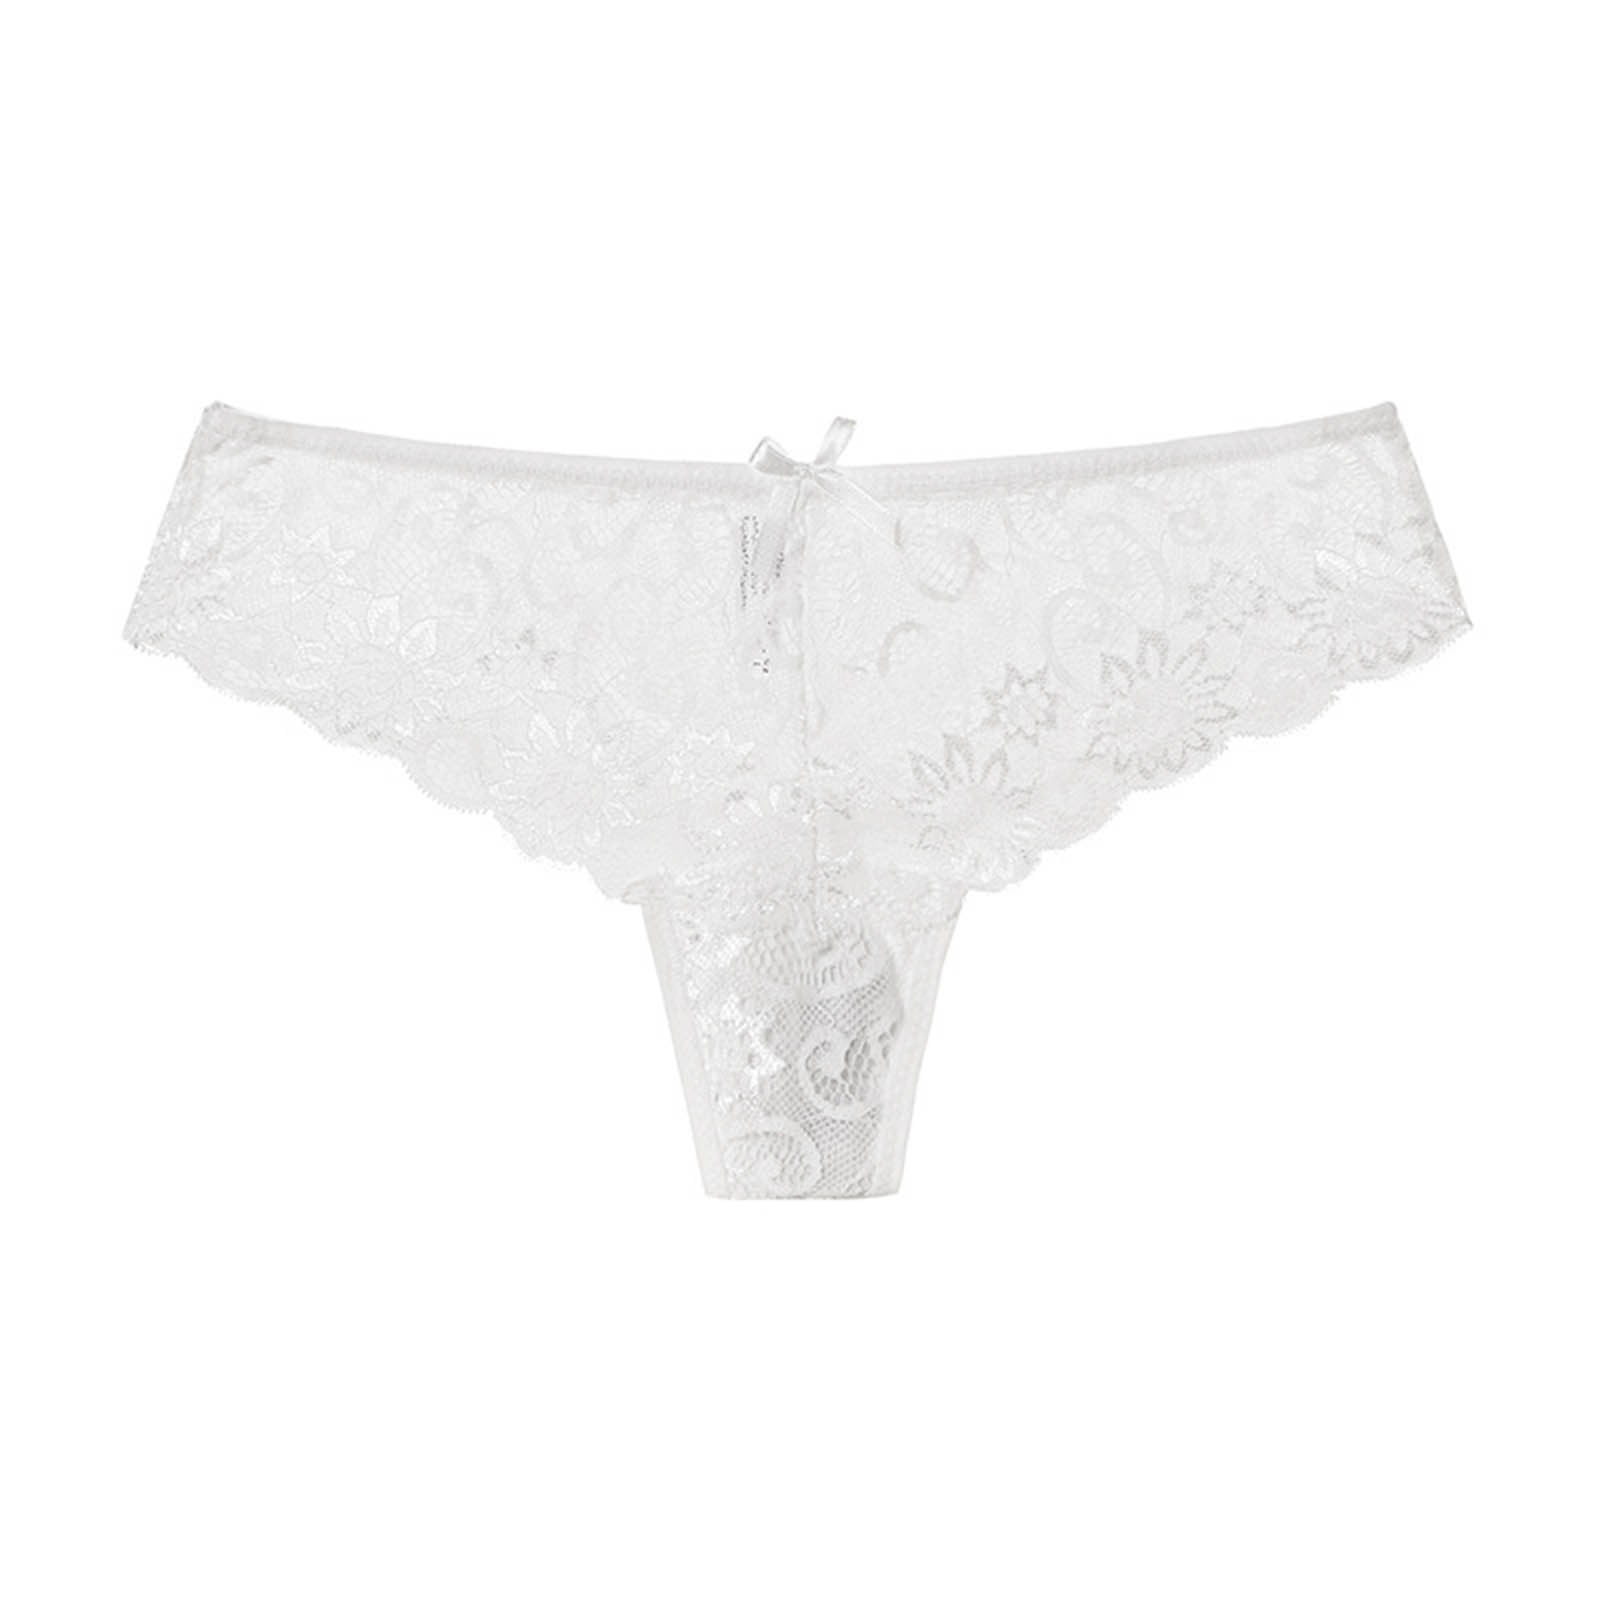 Odeerbi Clearance Lace Briefs,See Through Panties,Women Cutut Lace ...